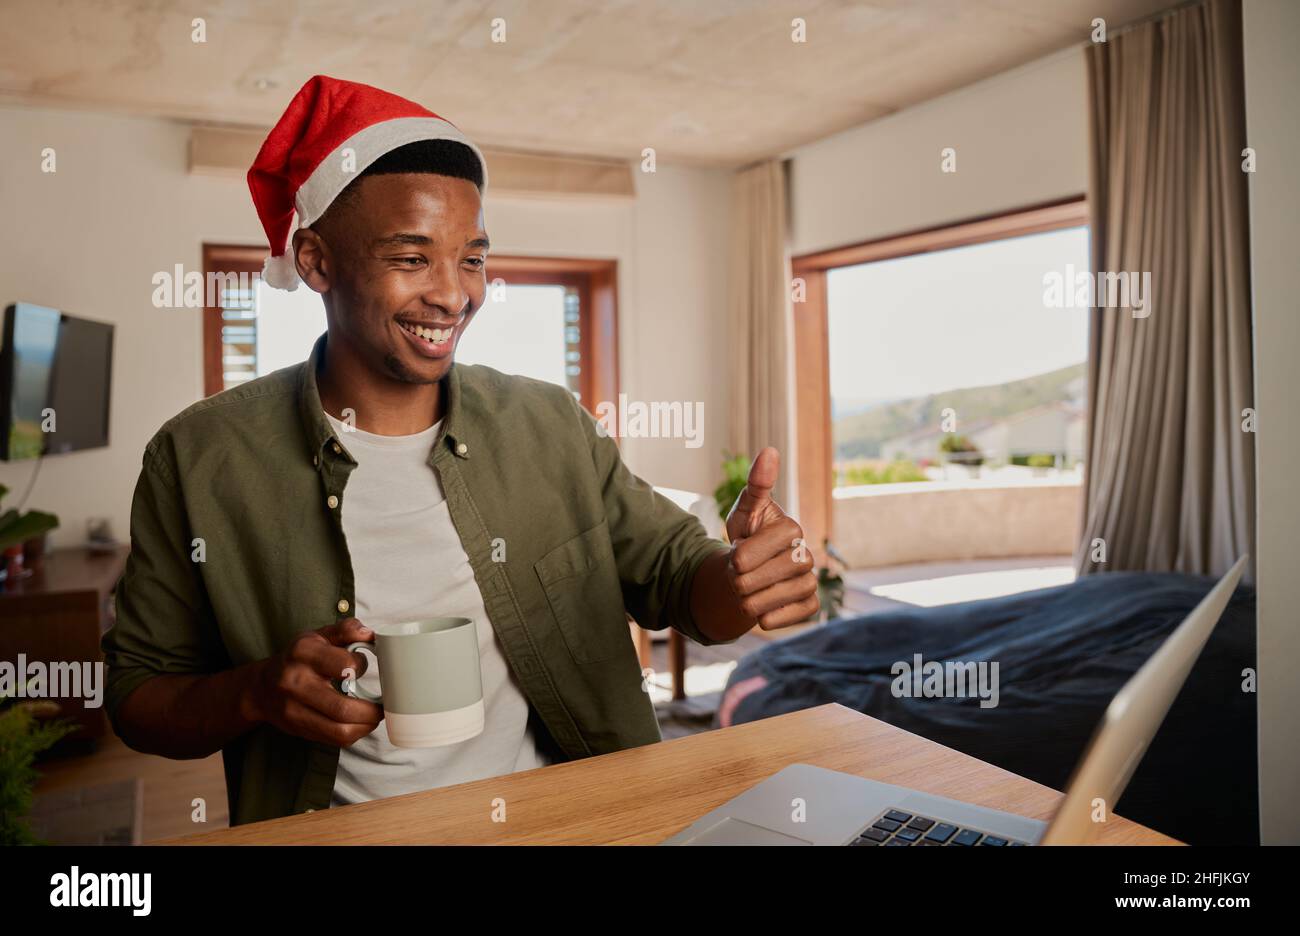 Young adult black male wearing Christmas hat, giving thumbs up while on online call. Sitting at kitchen counter using laptop. Stock Photo